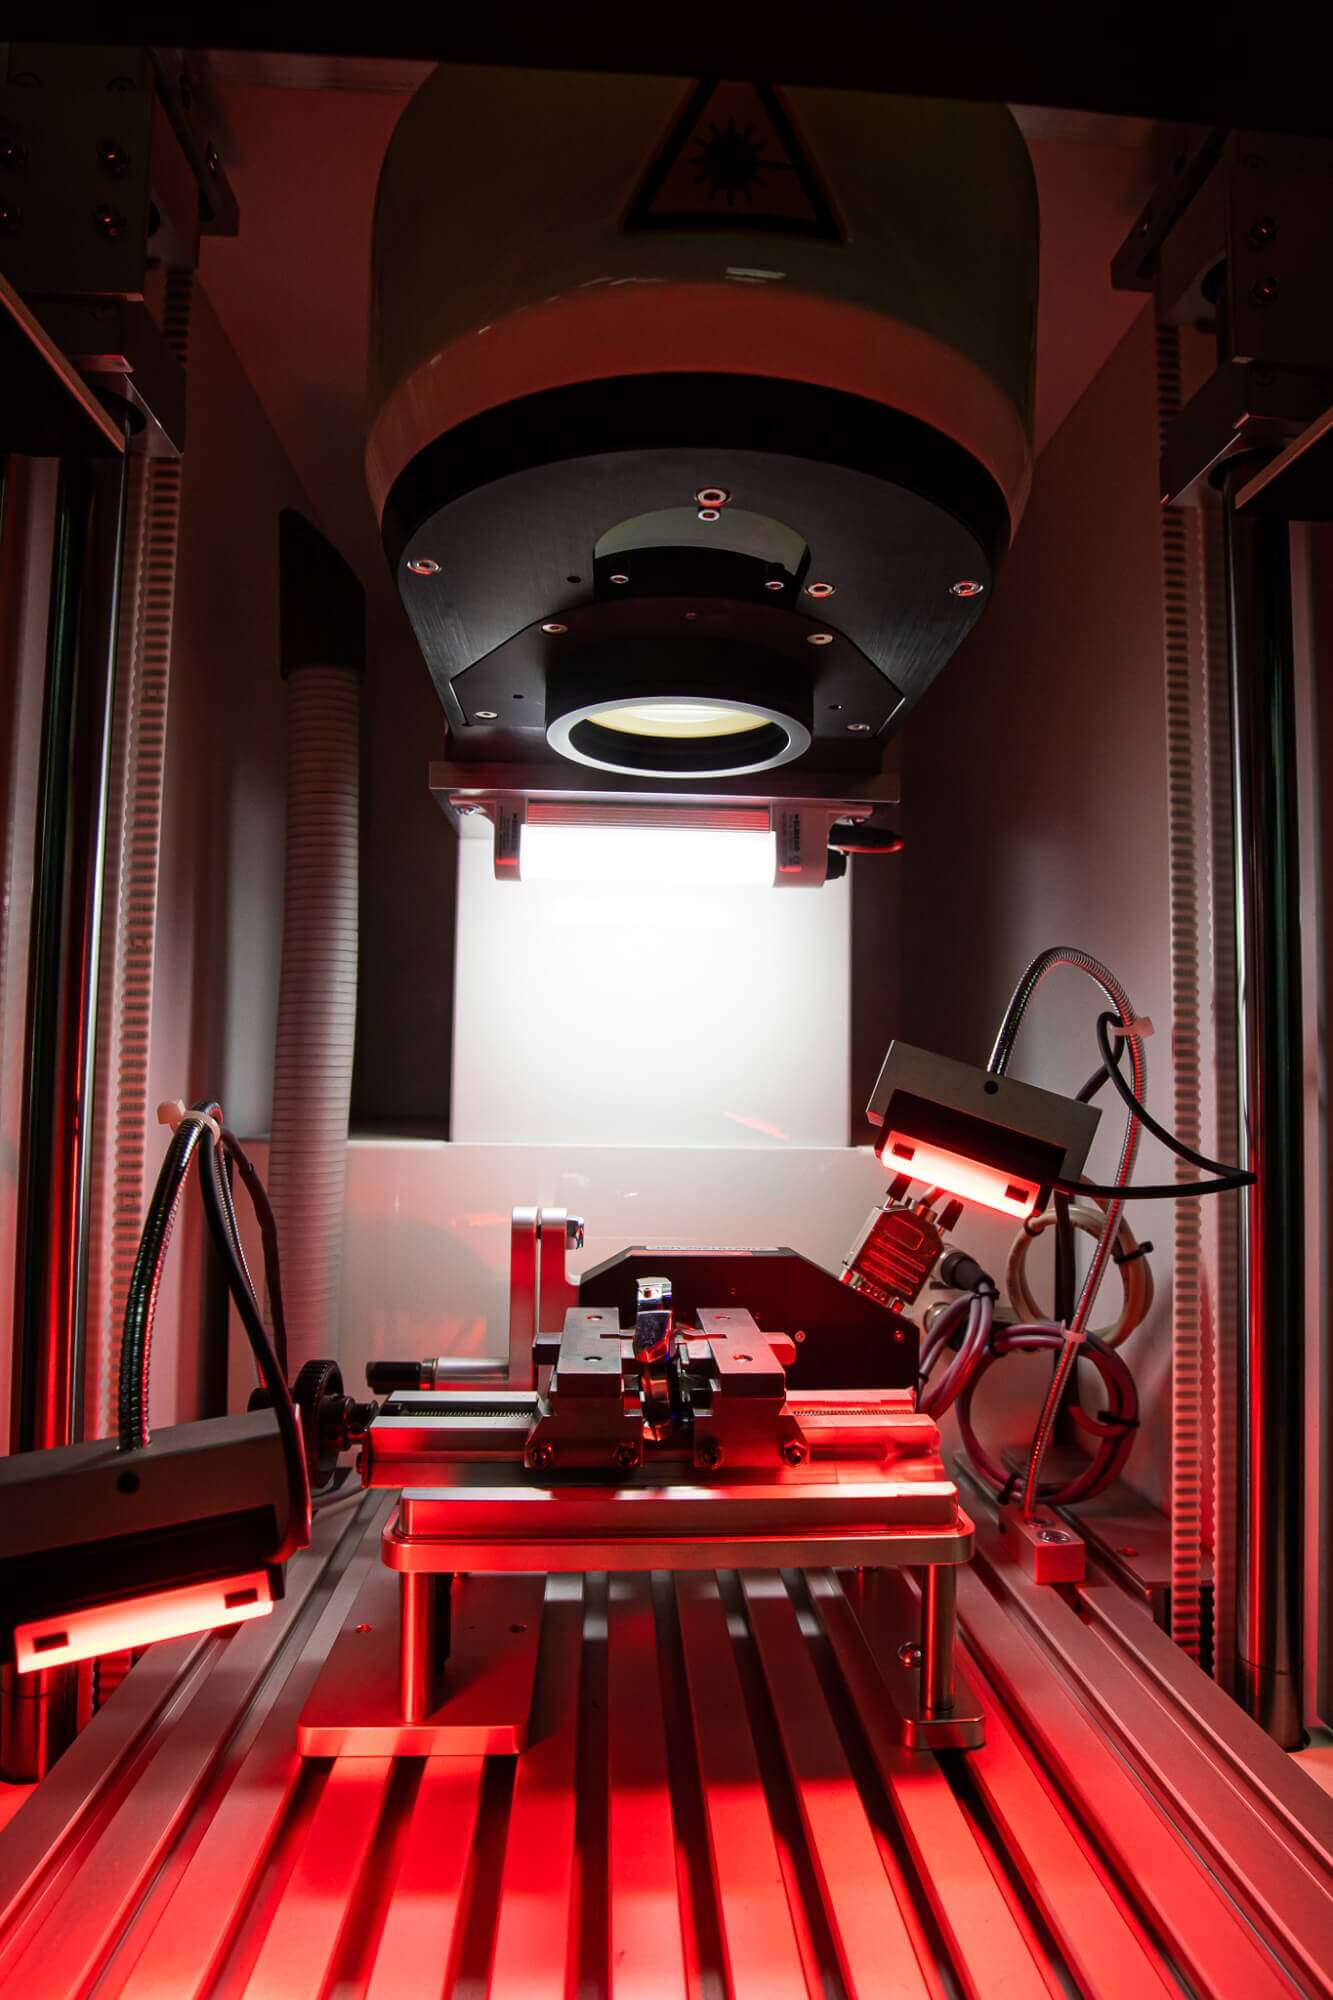 image showing the inside of the laser engraving machine at My Jewelry Repair